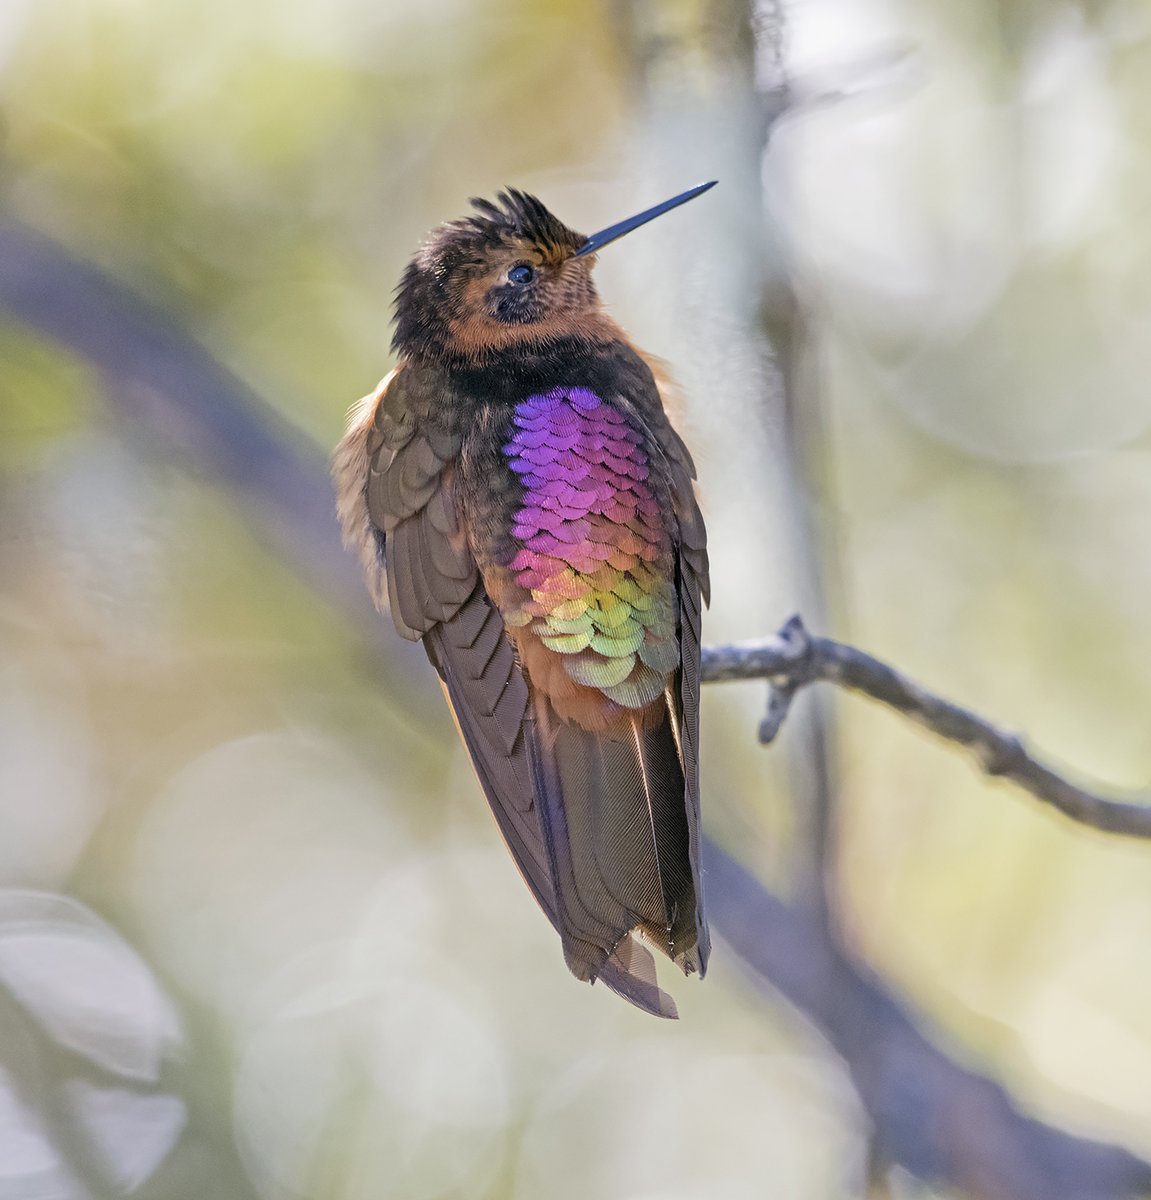 And finally, the Shining Sunbeam, an earth-toned bird that carries a little backpack of sunbeams wherever it goes.Pic by Doug Greenberg (CC BY-NC 2.0)  https://www.flickr.com/photos/dagberg/40736026585